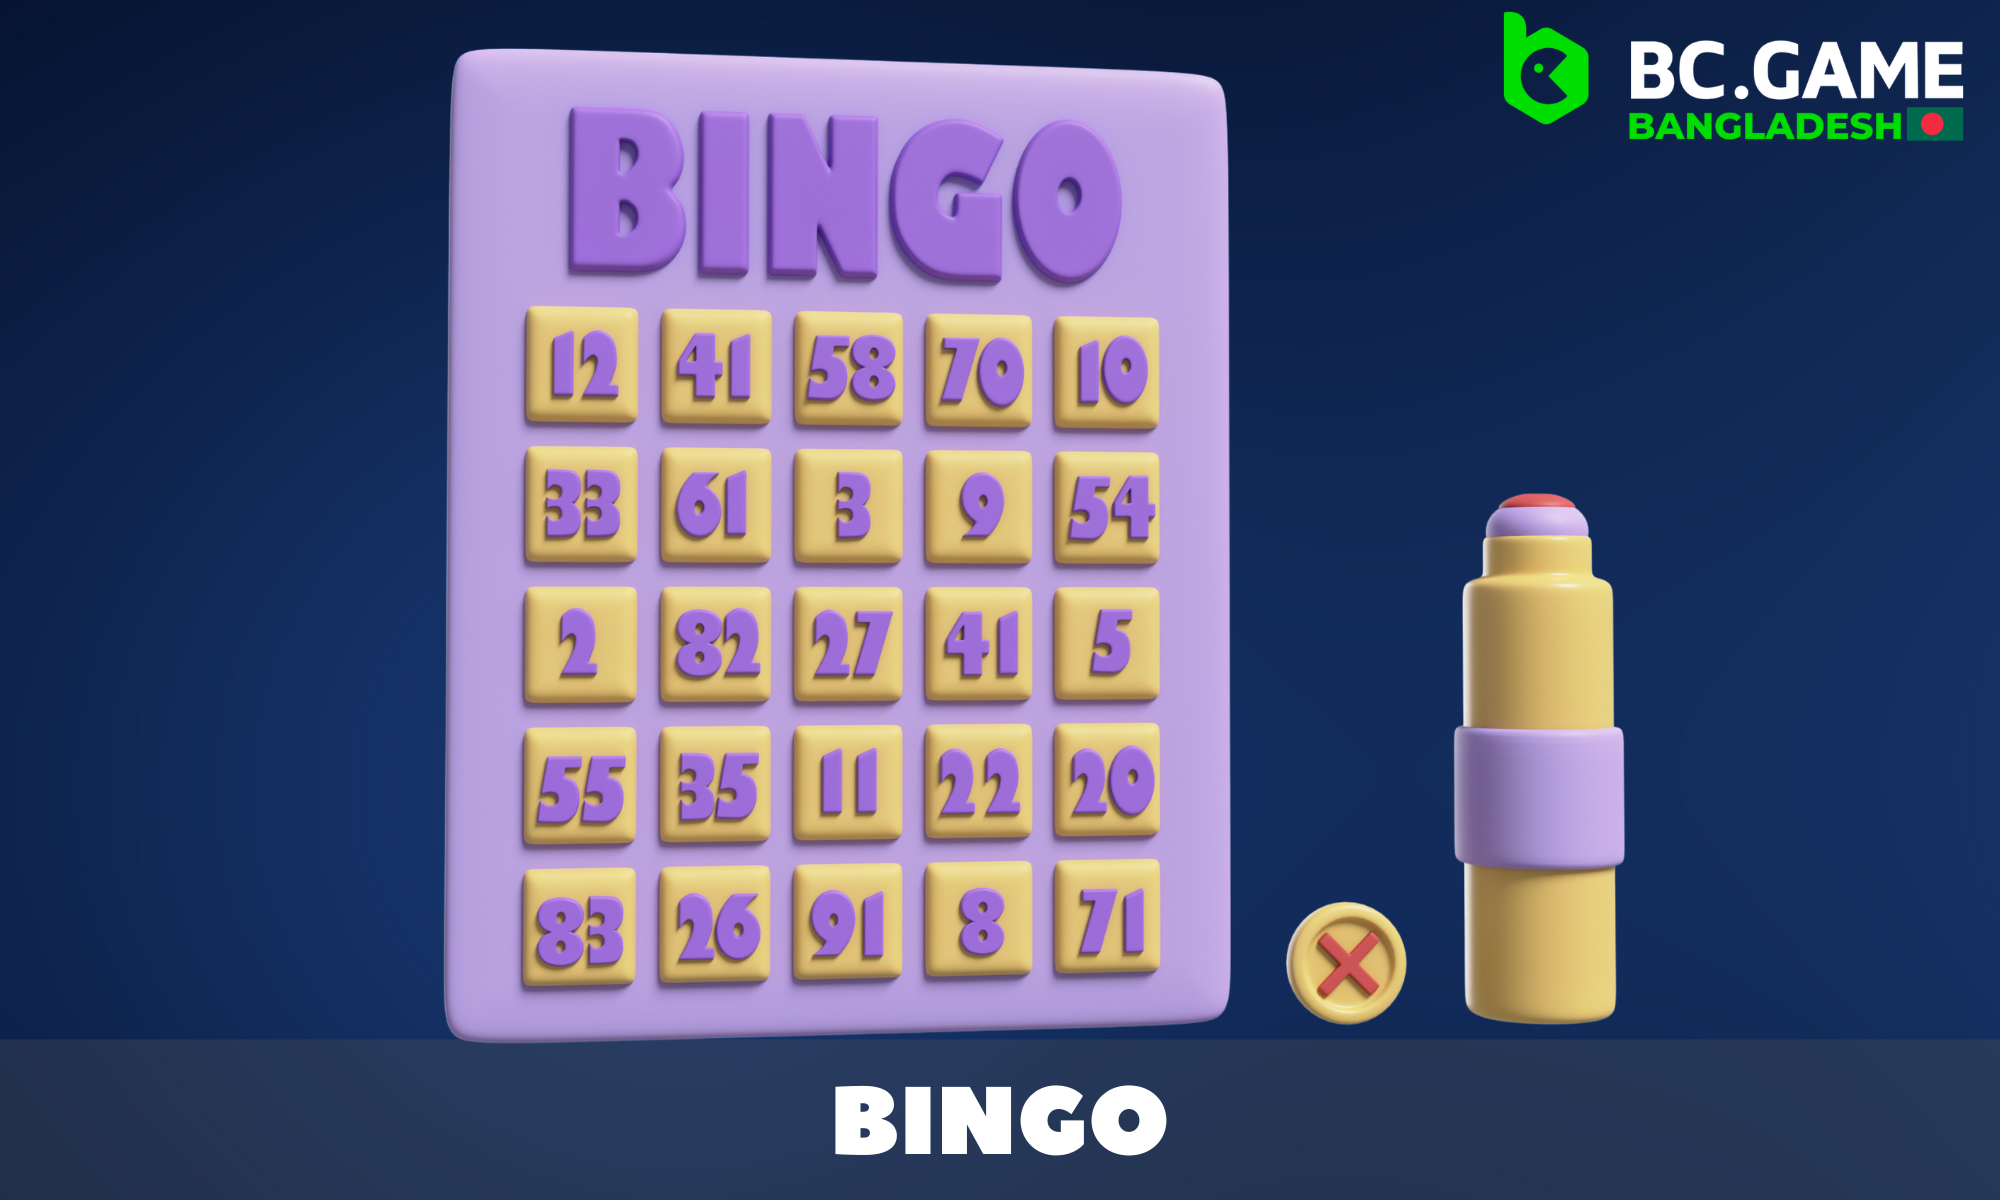 BC Game offers 5 variants of Bingo for players from Bangladesh